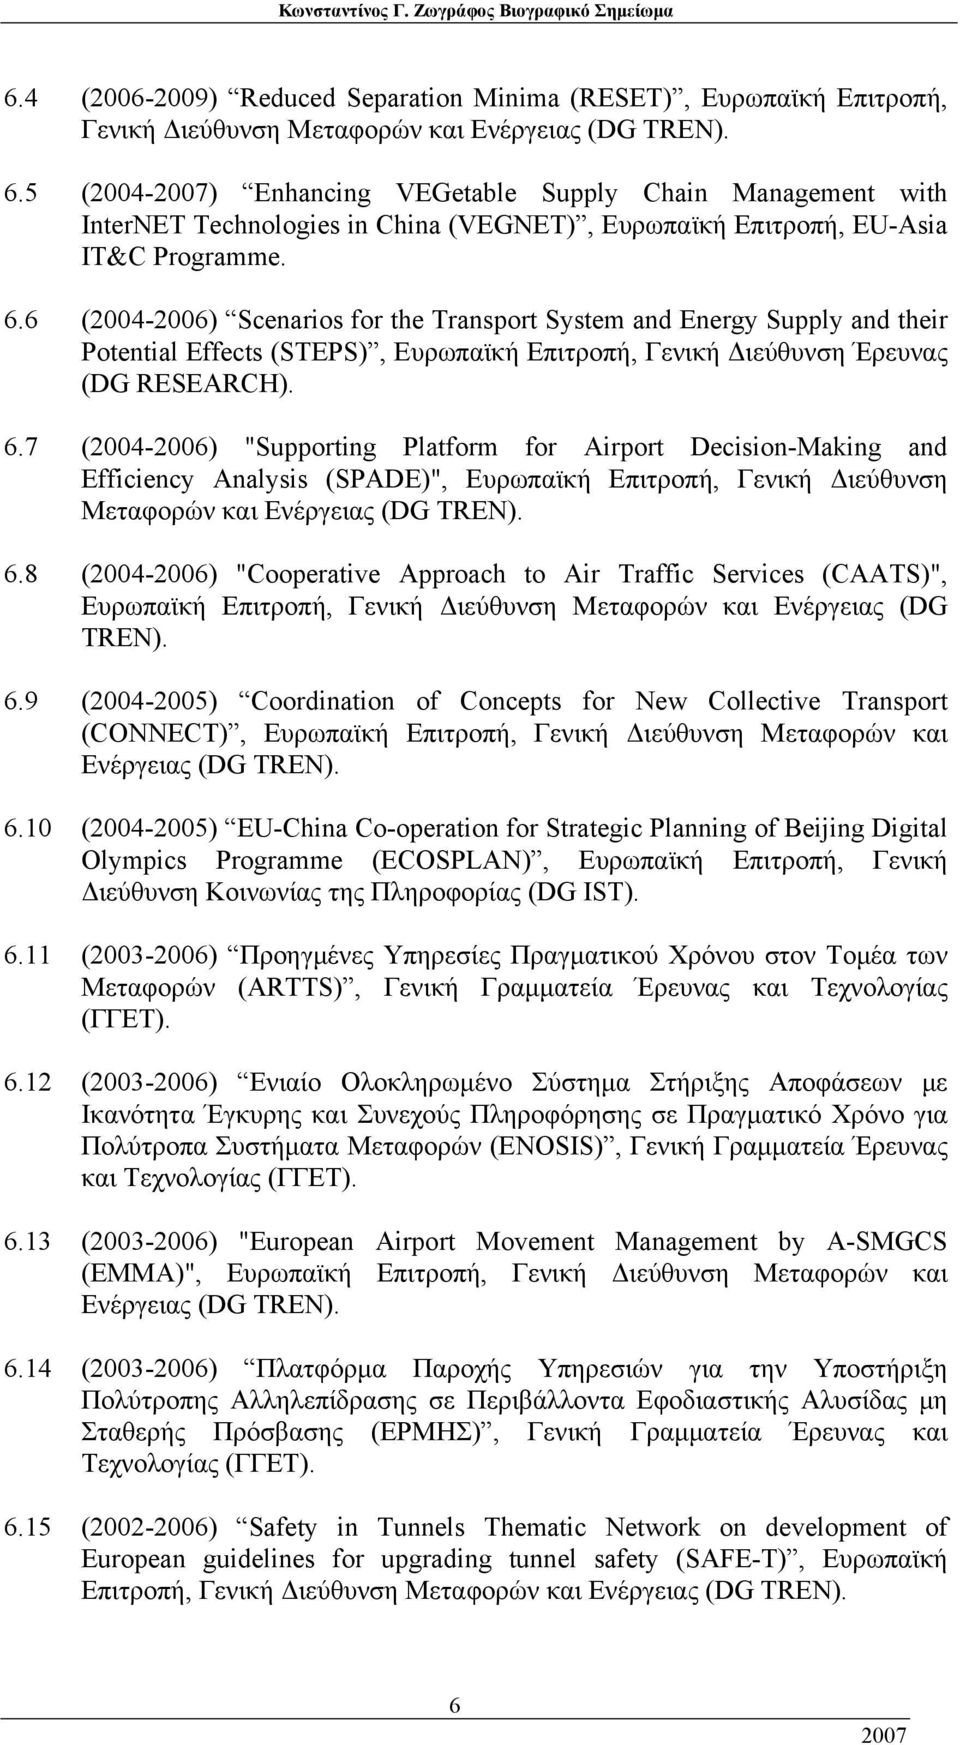 6 (2004-2006) Scenarios for the Transport System and Energy Supply and their Potential Effects (STEPS), Ευρωπαϊκή Επιτροπή, Γενική Διεύθυνση Έρευνας (DG RESEARCH). 6.